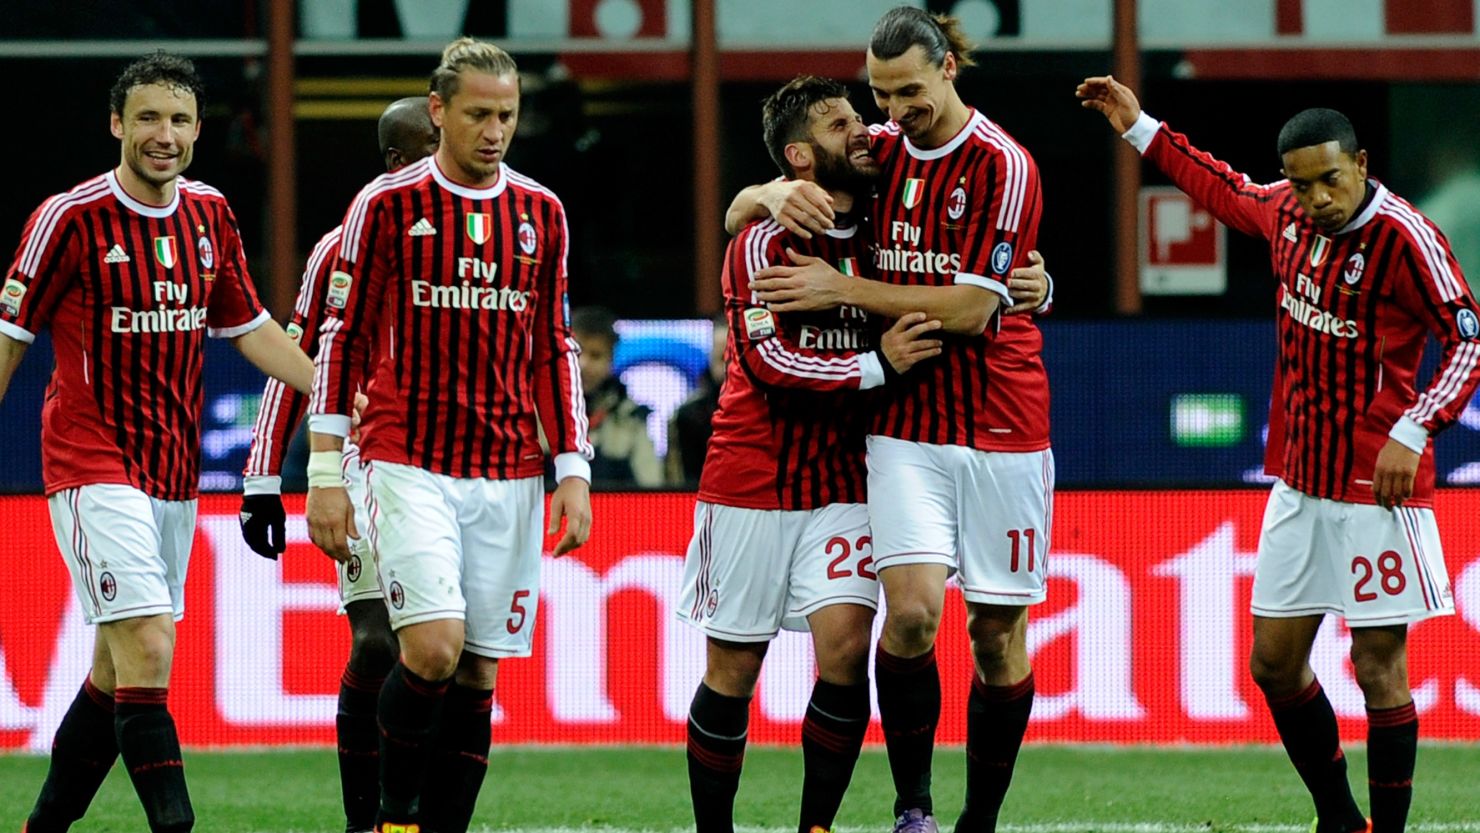 Zlatan Ibrahimovic is congratulated after scoring in AC Milan's win over Cagliari.